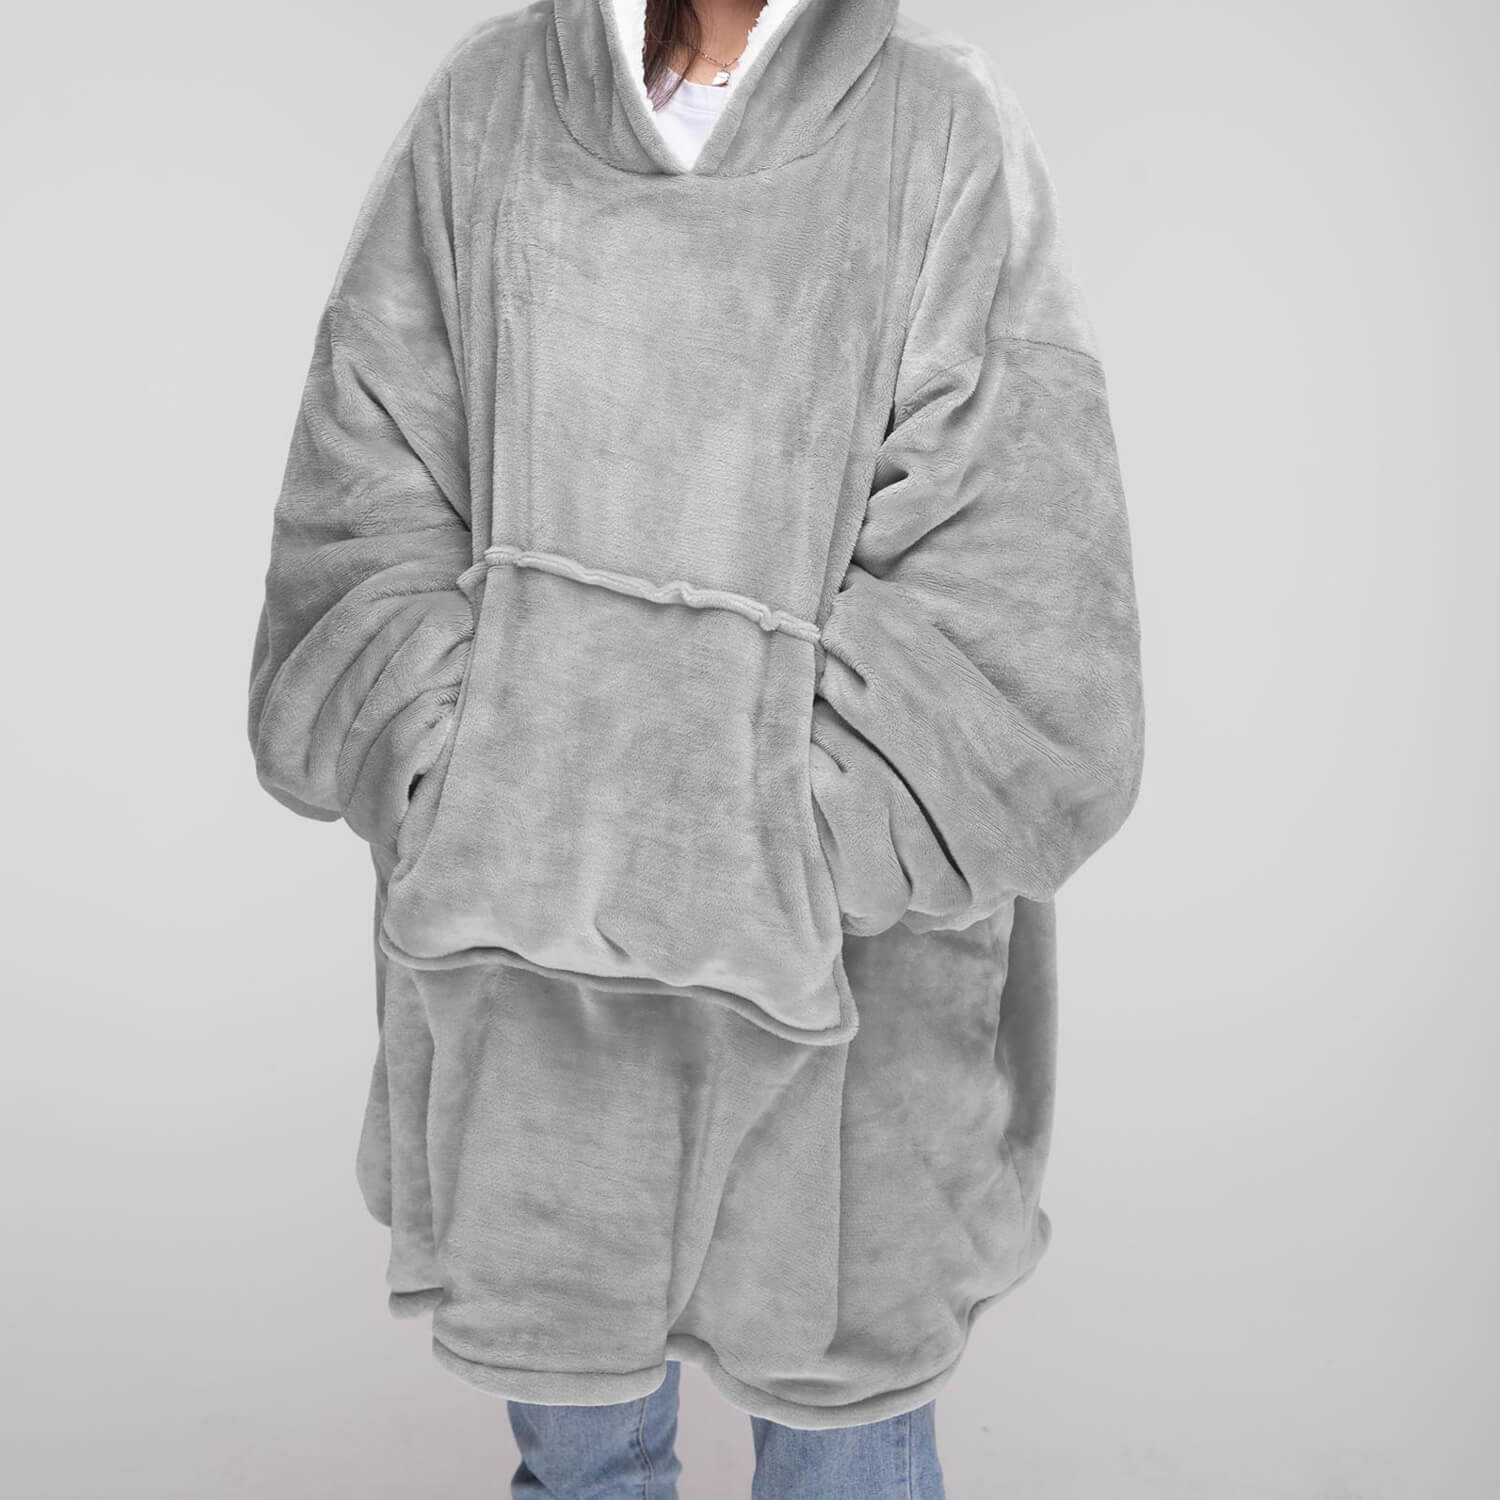 The Home Bedroom Cosy Robe - Grey 1 Shaws Department Stores